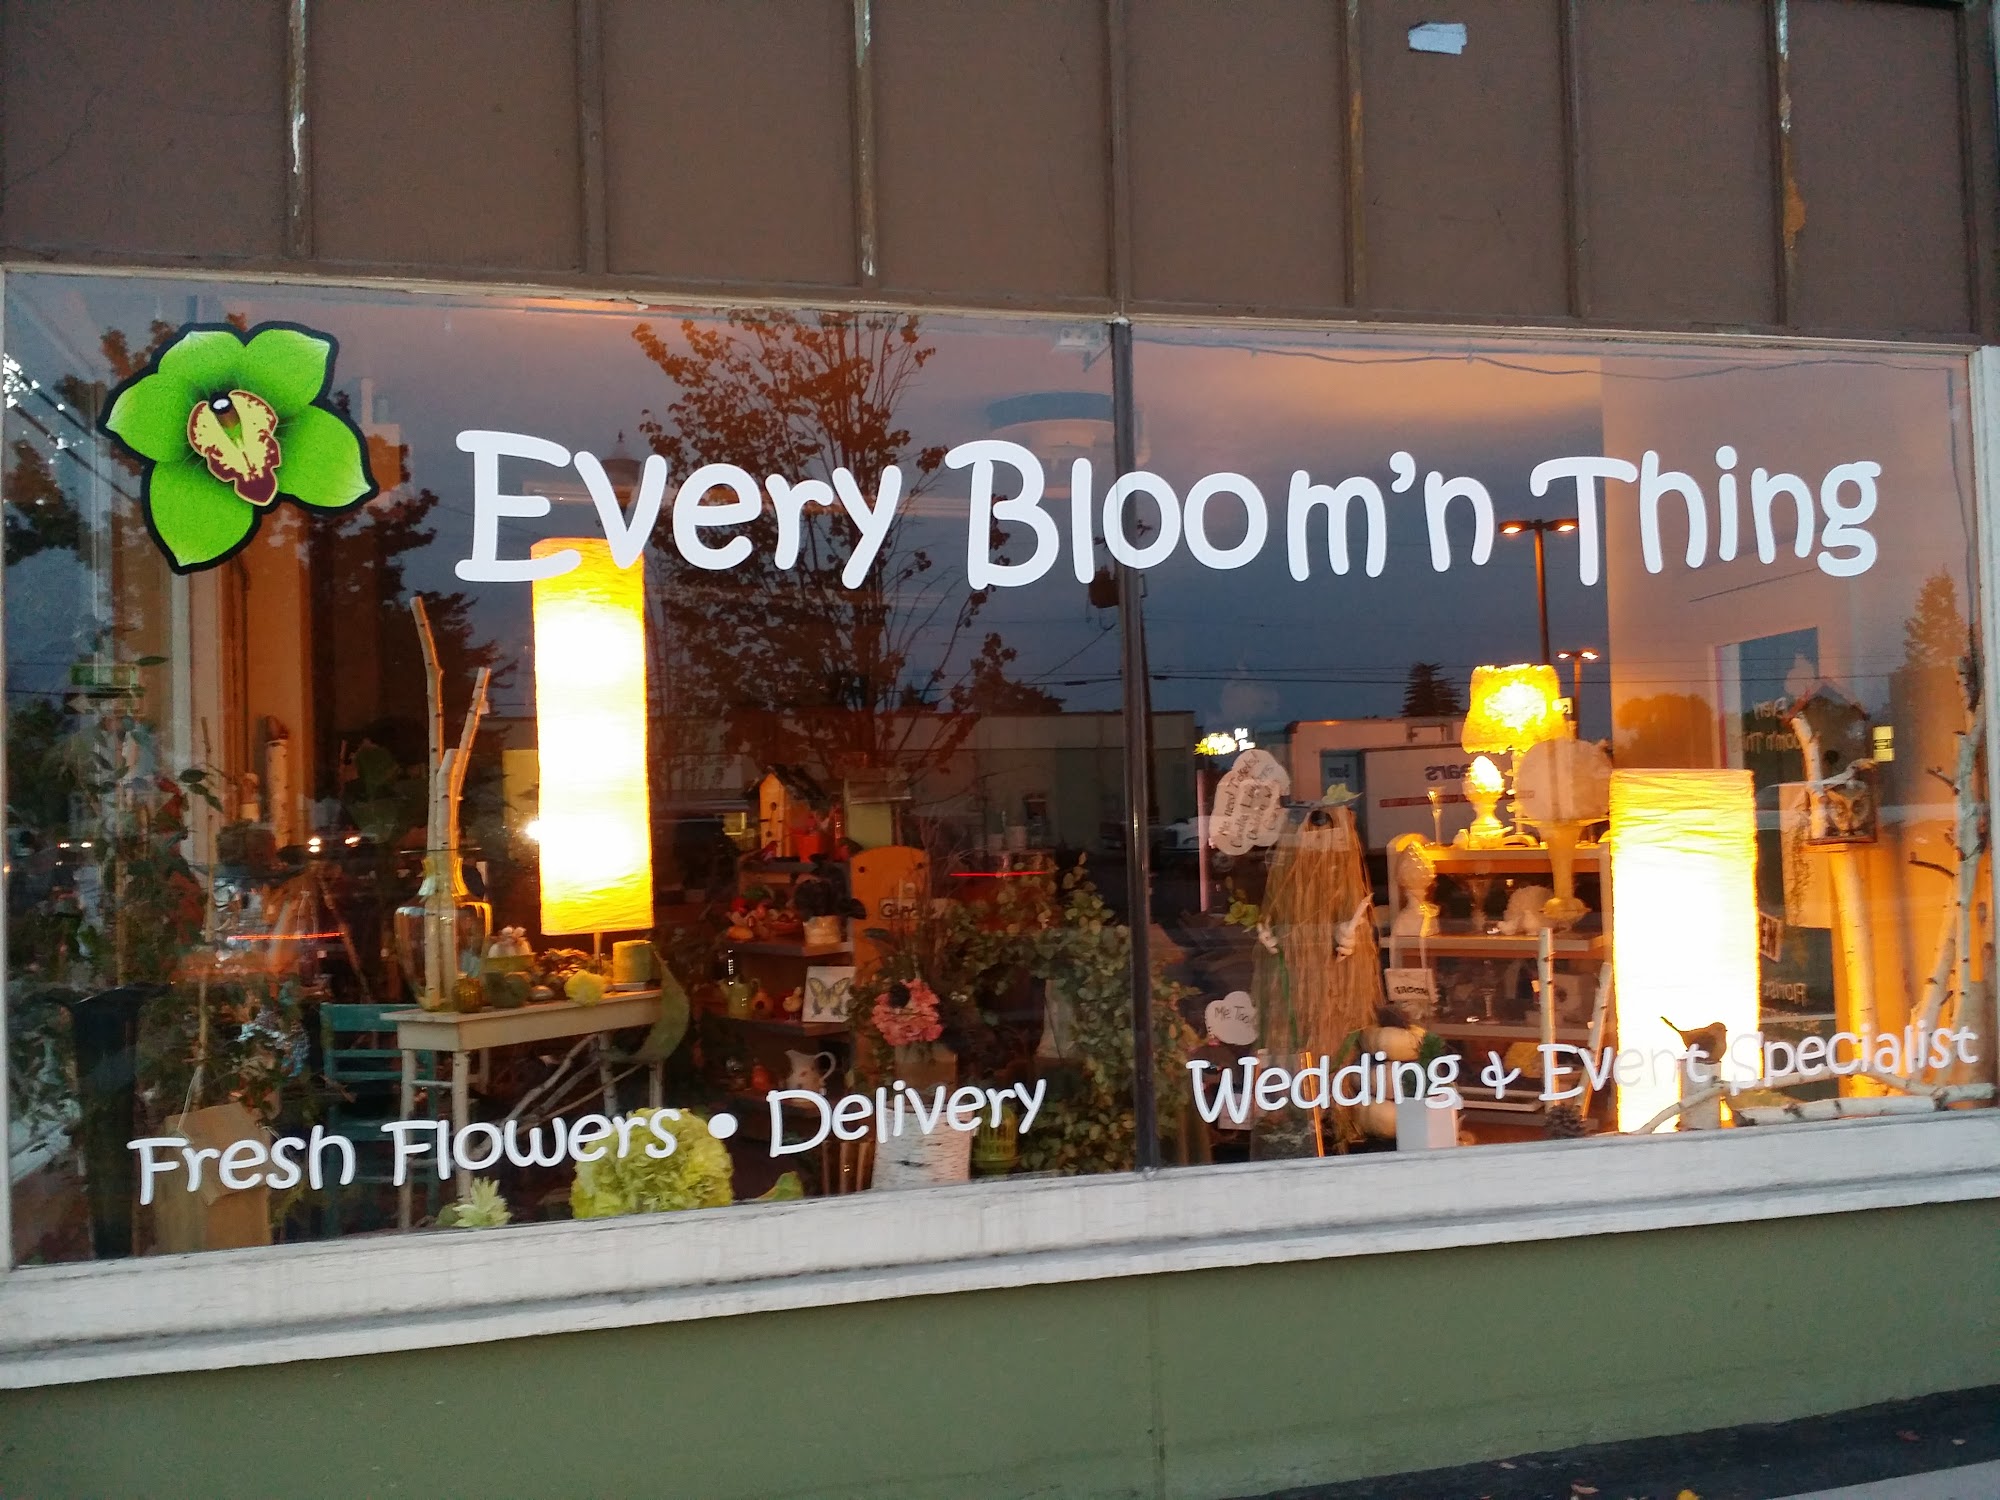 Every Bloom'n Thing Flower Shop, Rock Shop, Gifts and Delivery